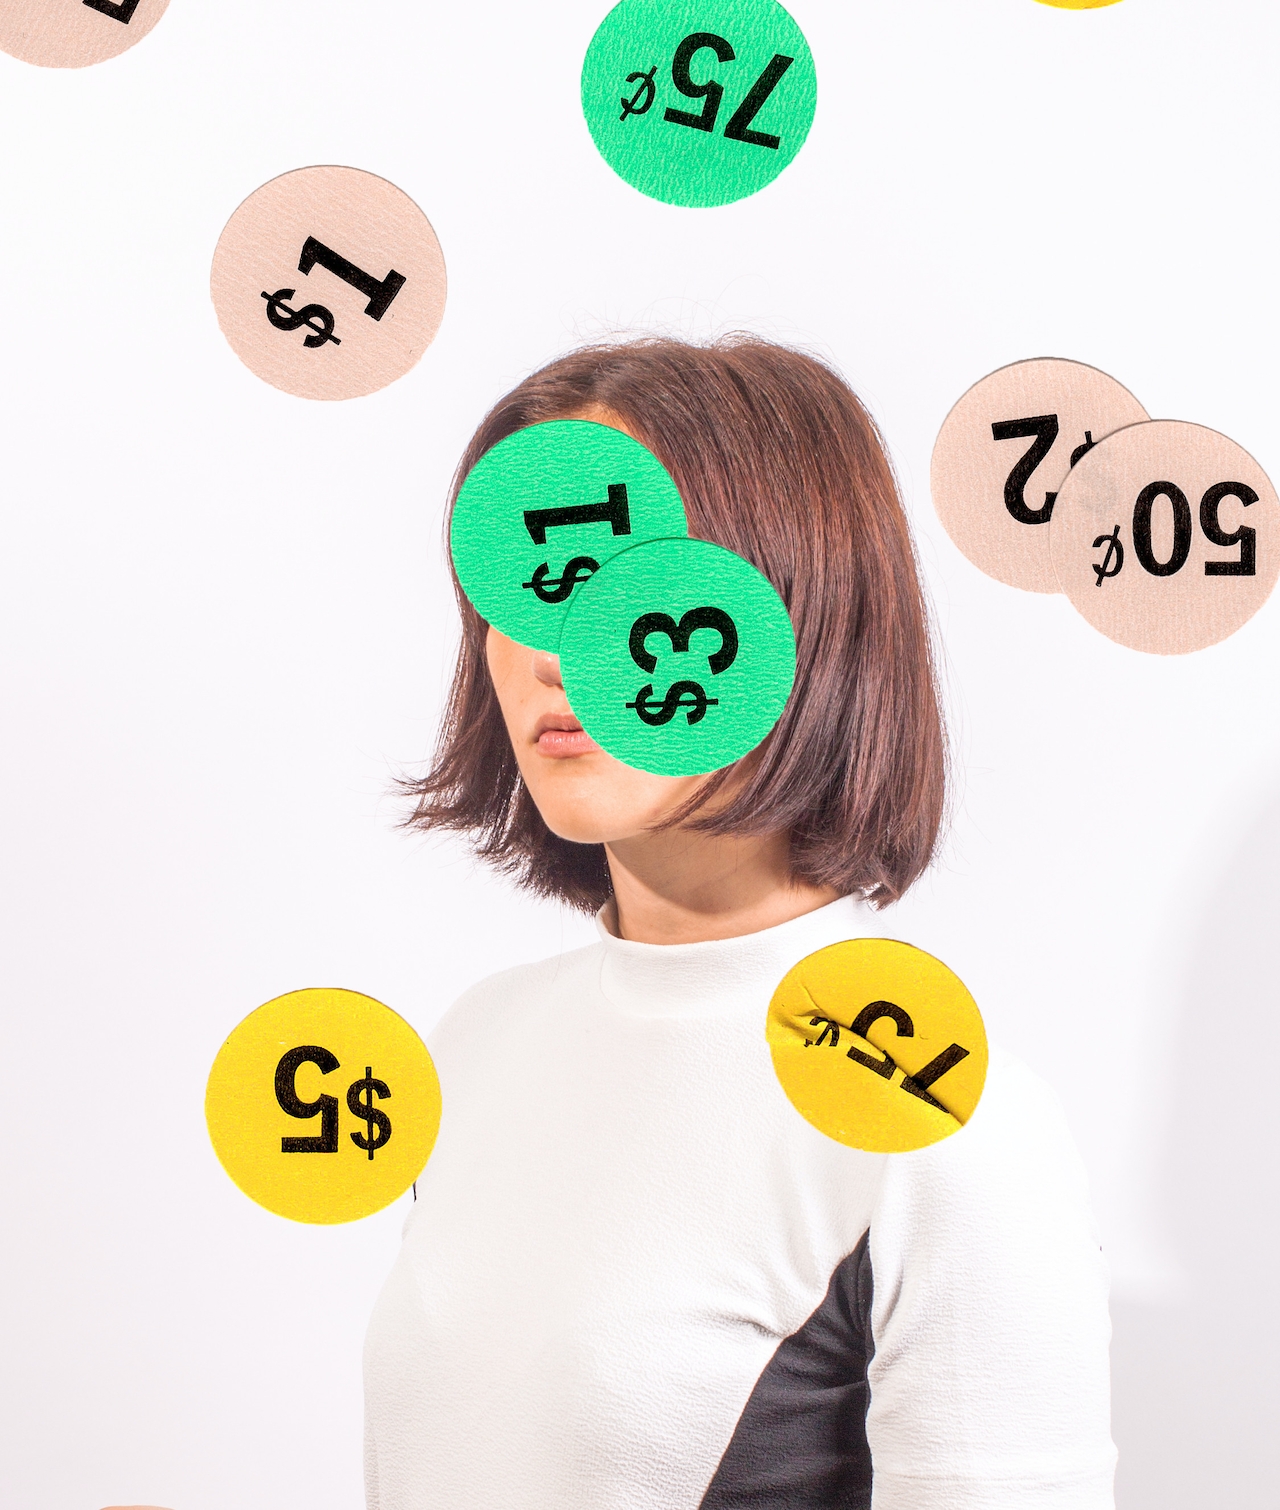 A photo of a brunette girl with price tag stickers covering her face. Used as the featured image in a blog post about how to market your business without using social media.